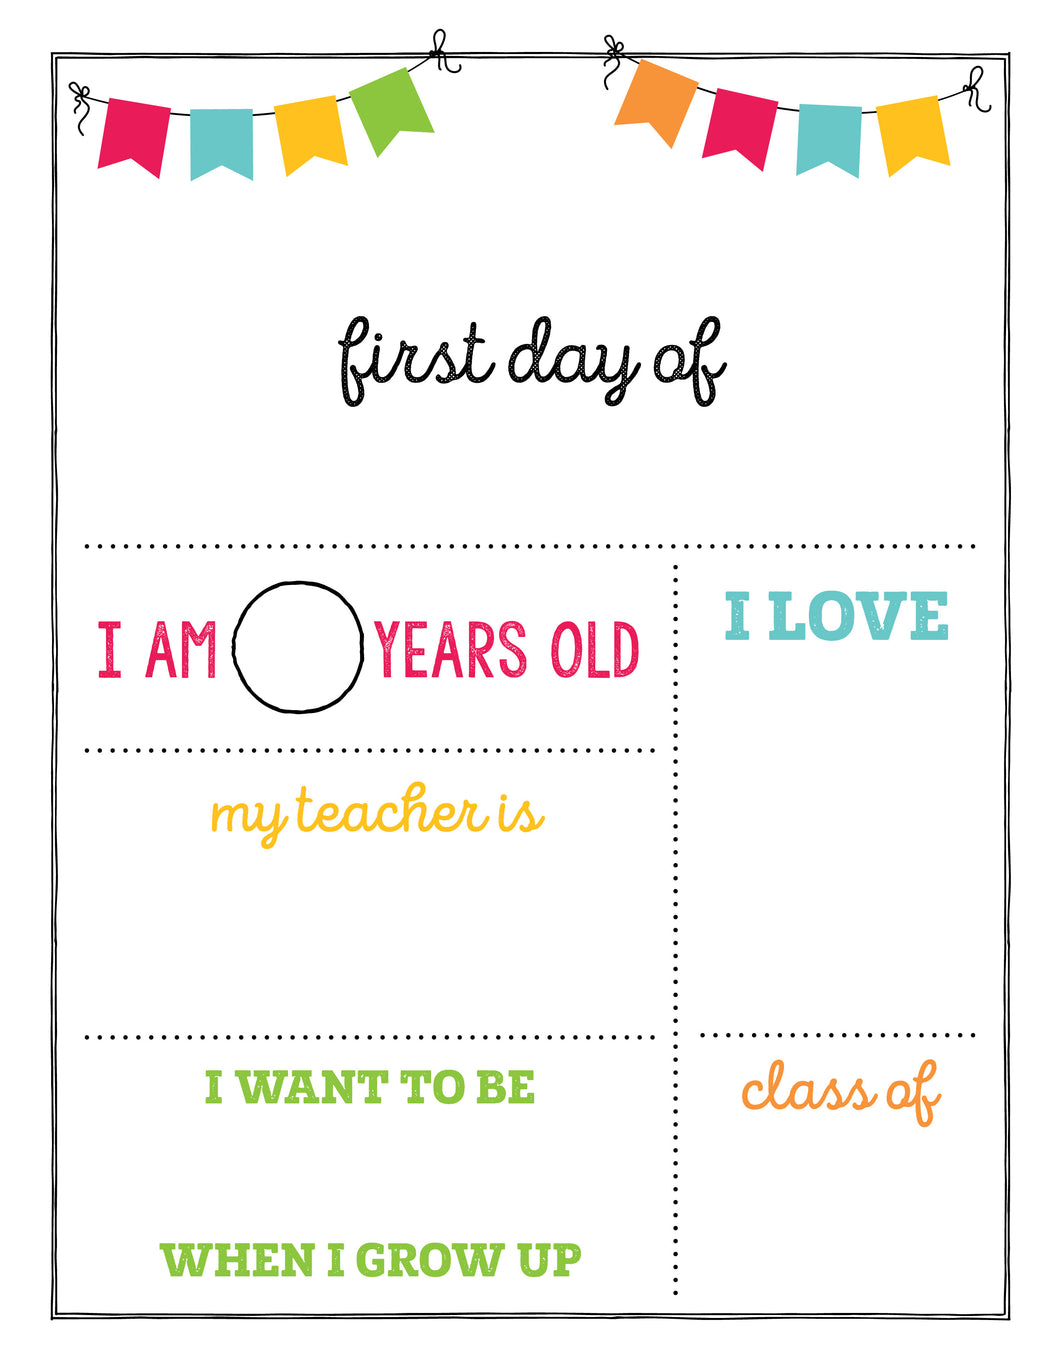 First Day of School Printable